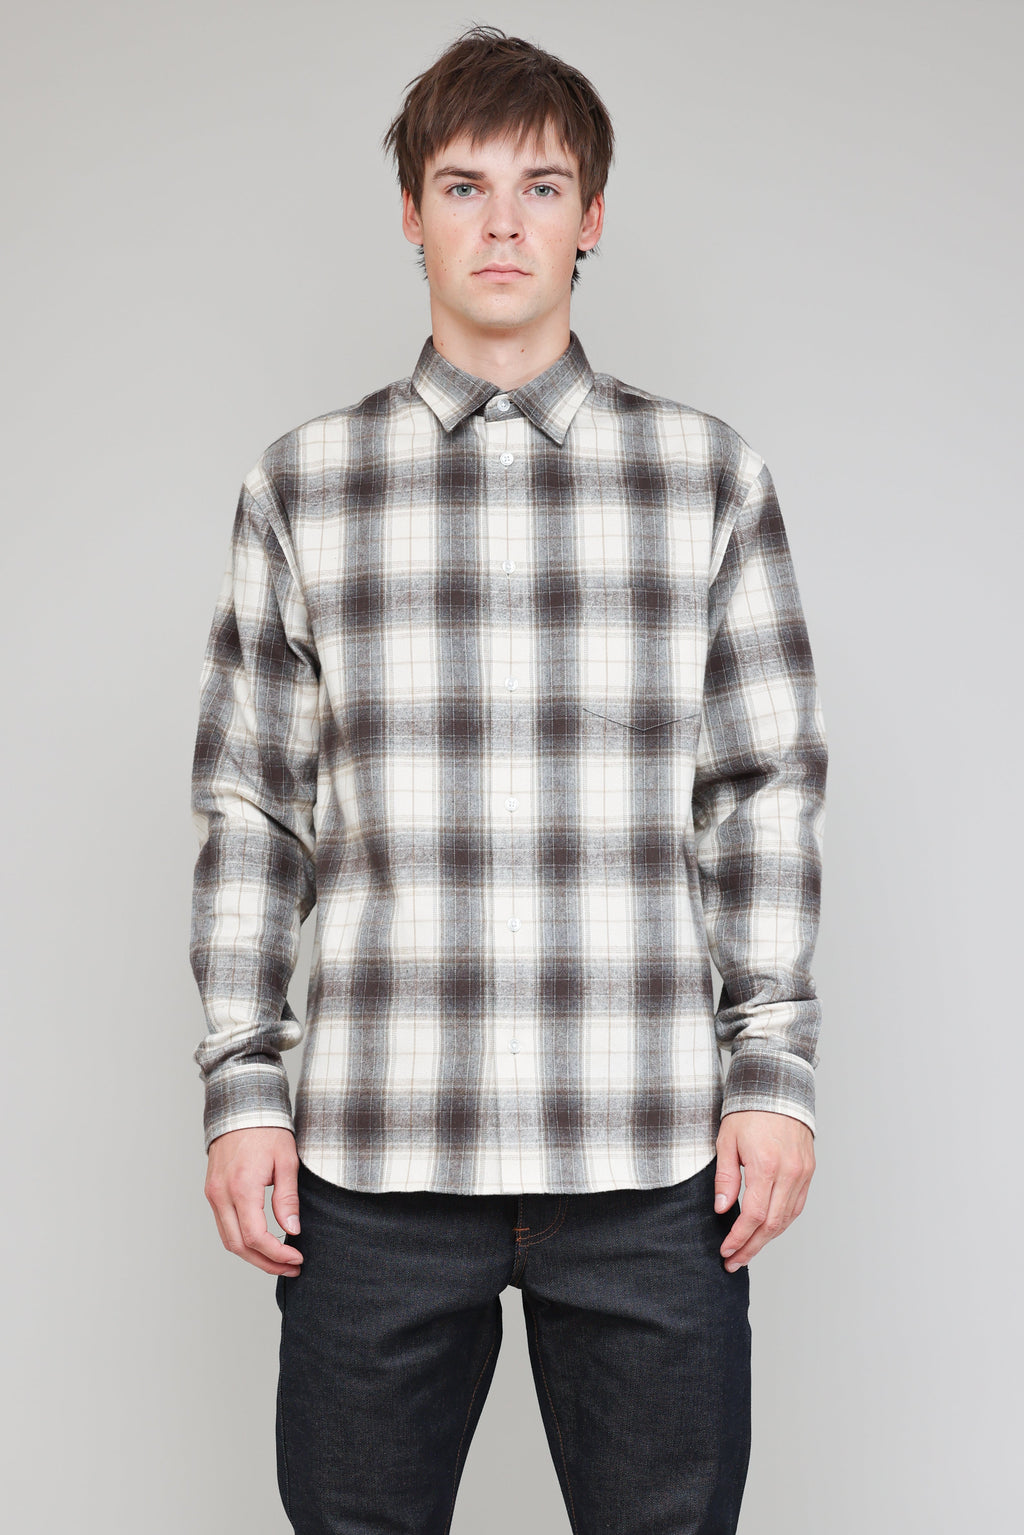 Japanese Shaggy Plaid in Brown and White 02